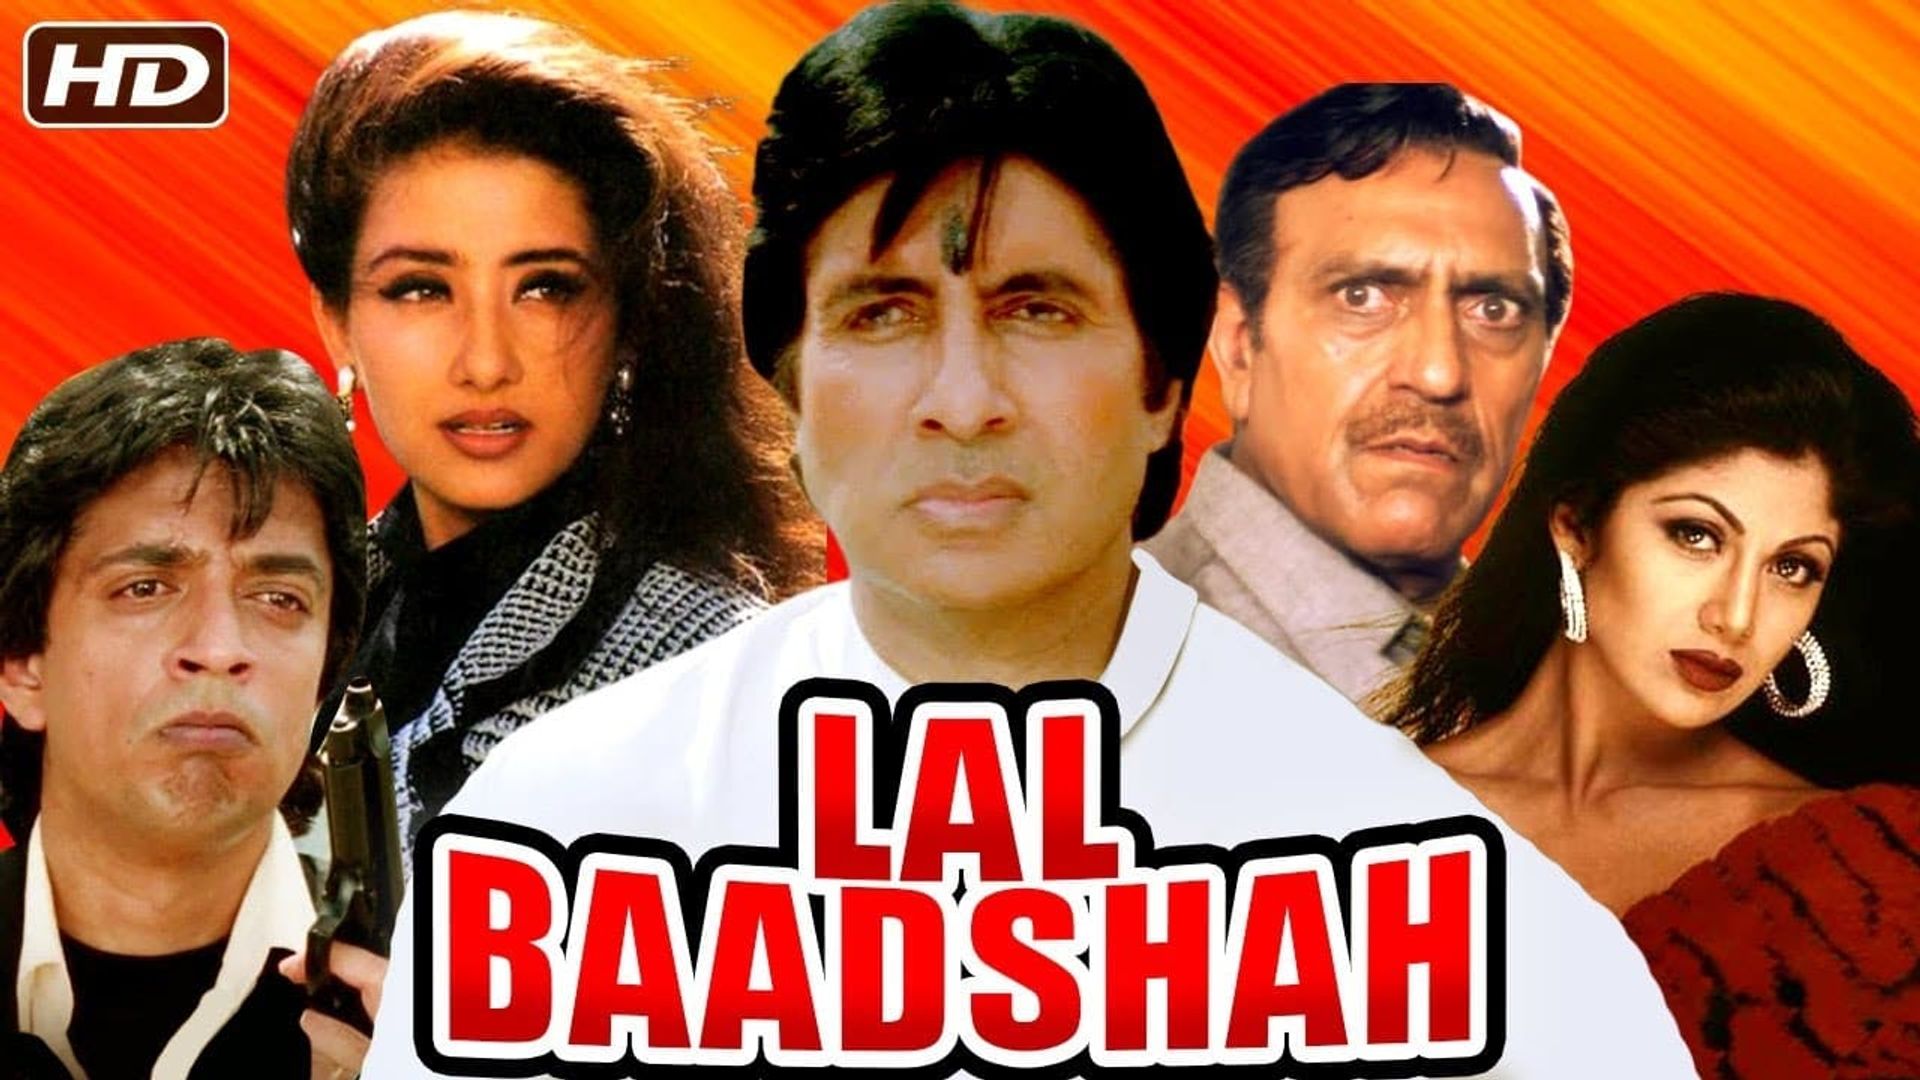 Lal Baadshah background